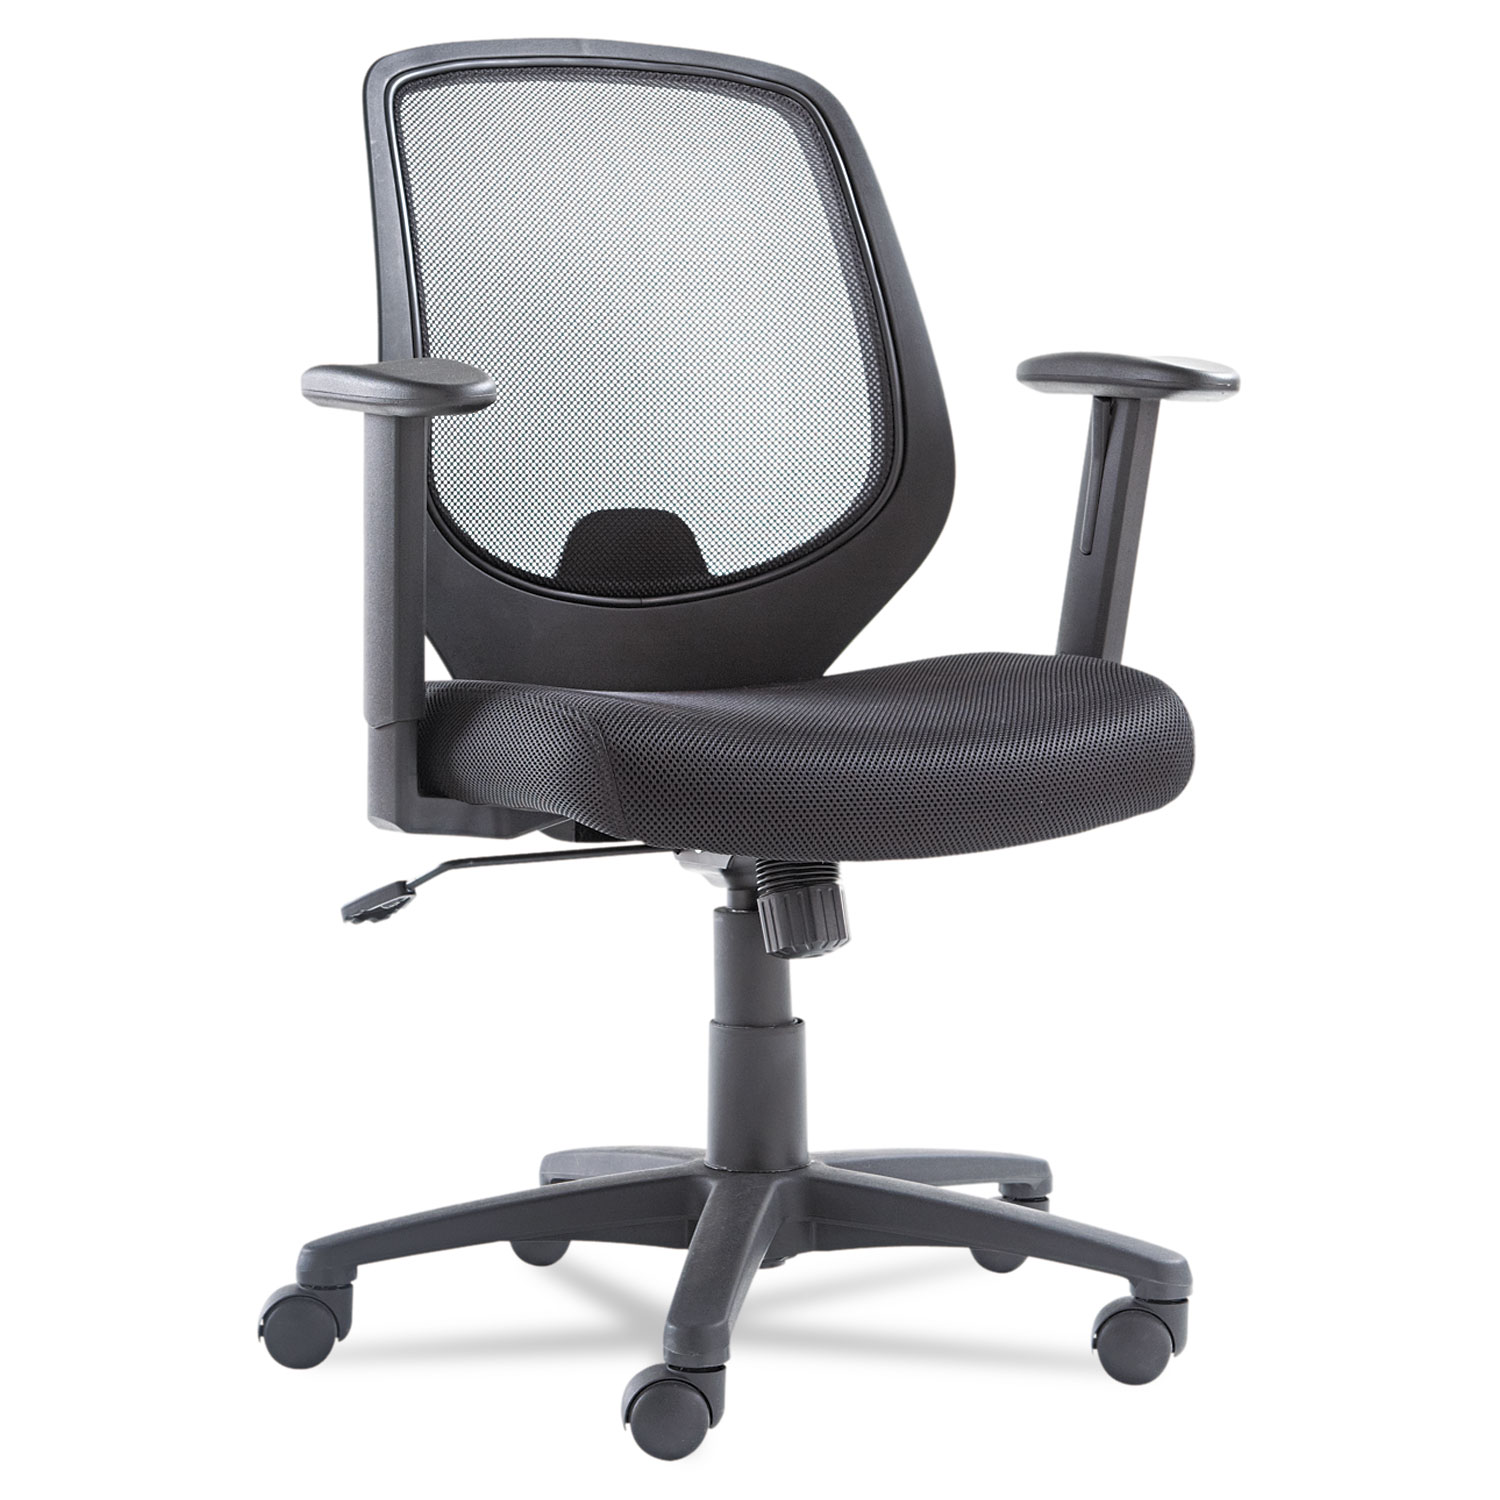  OIF OIFCD4218 Swivel/Tilt Mesh Mid-Back Chair, Supports up to 250 lbs., Black Seat/Black Back, Black Base (OIFCD4218) 